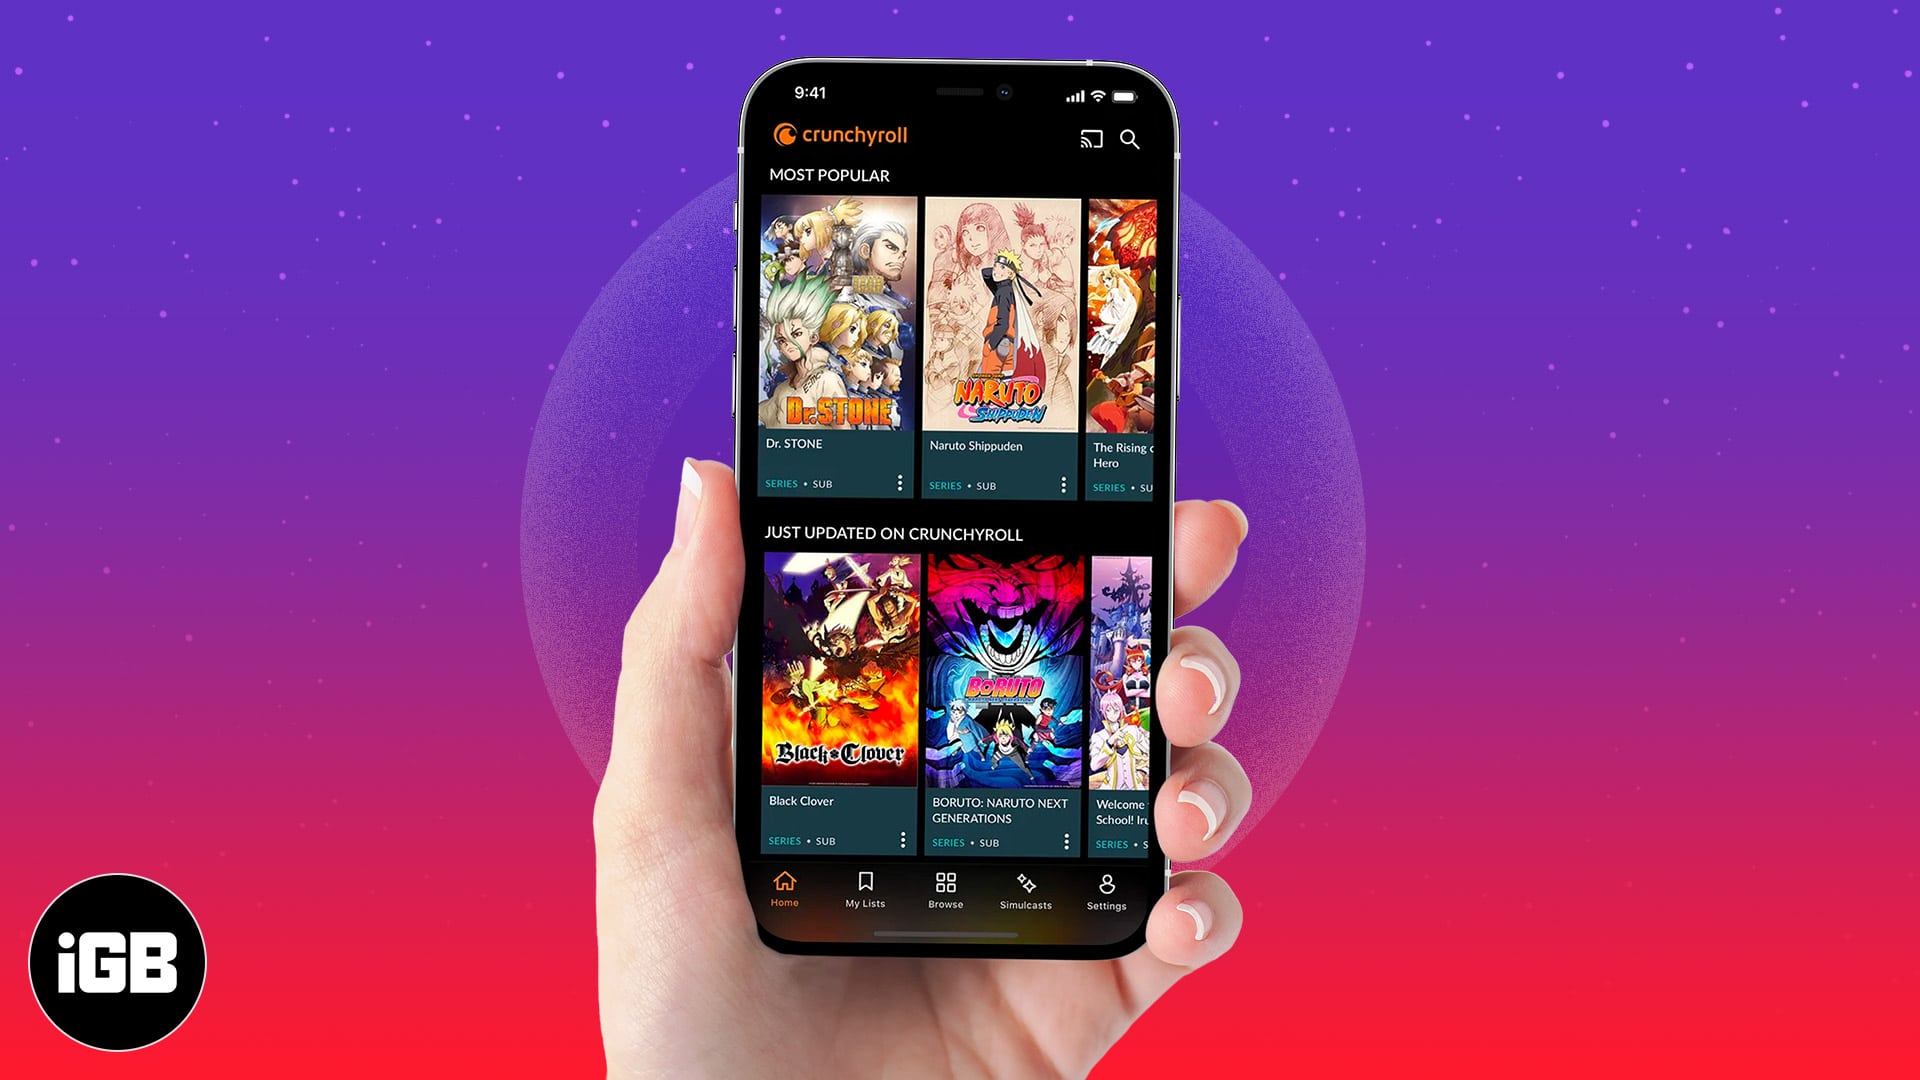 10 Best Anime Streaming Apps for Android and iOS | TechLatest